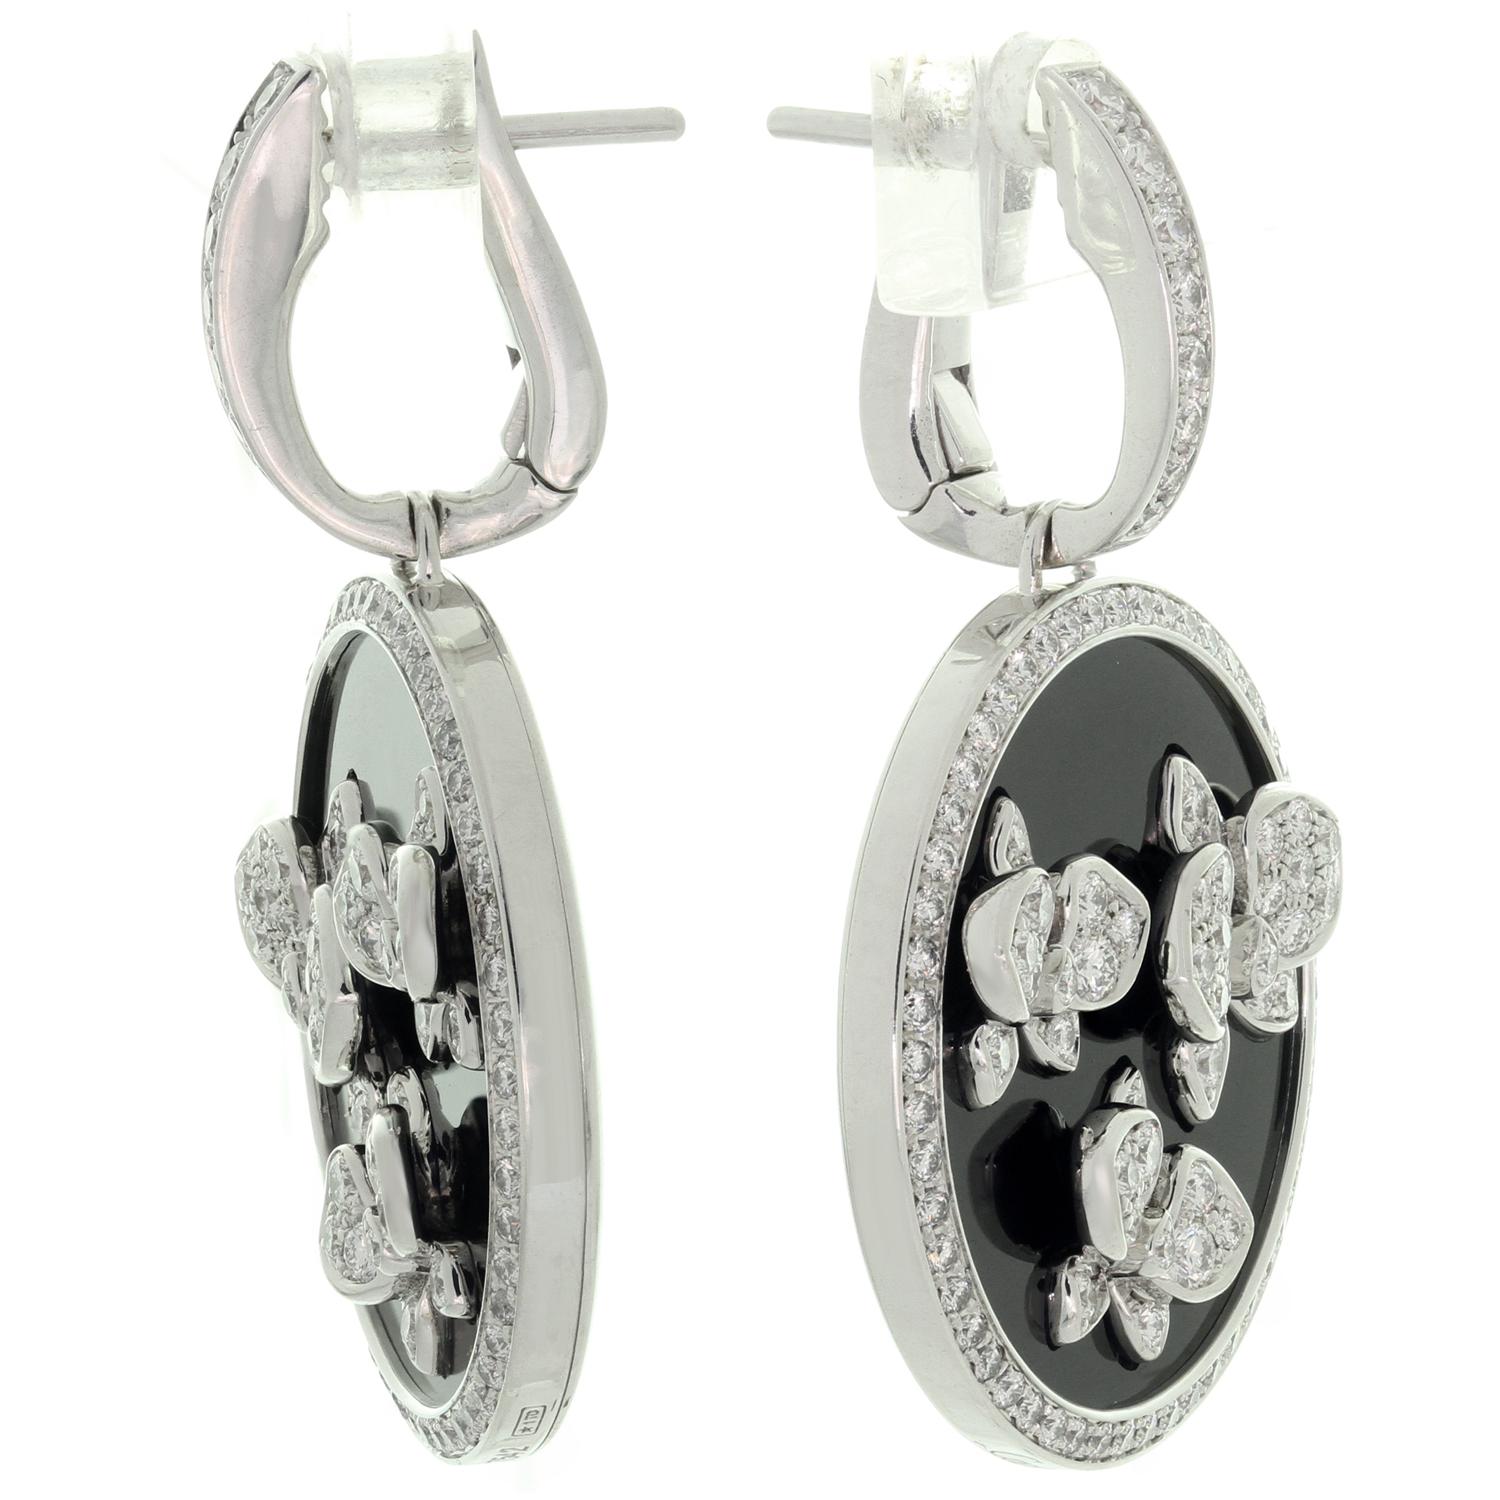 These fabulous Cartier earrings from the luxurious Caresse d’Orchidées collection are crafted in 18k white gold with brilliant-cut round D-F VVS1-VVS2 diamonds and feature round drops accented with sparkling orchid flowers on black onyx. A stunning